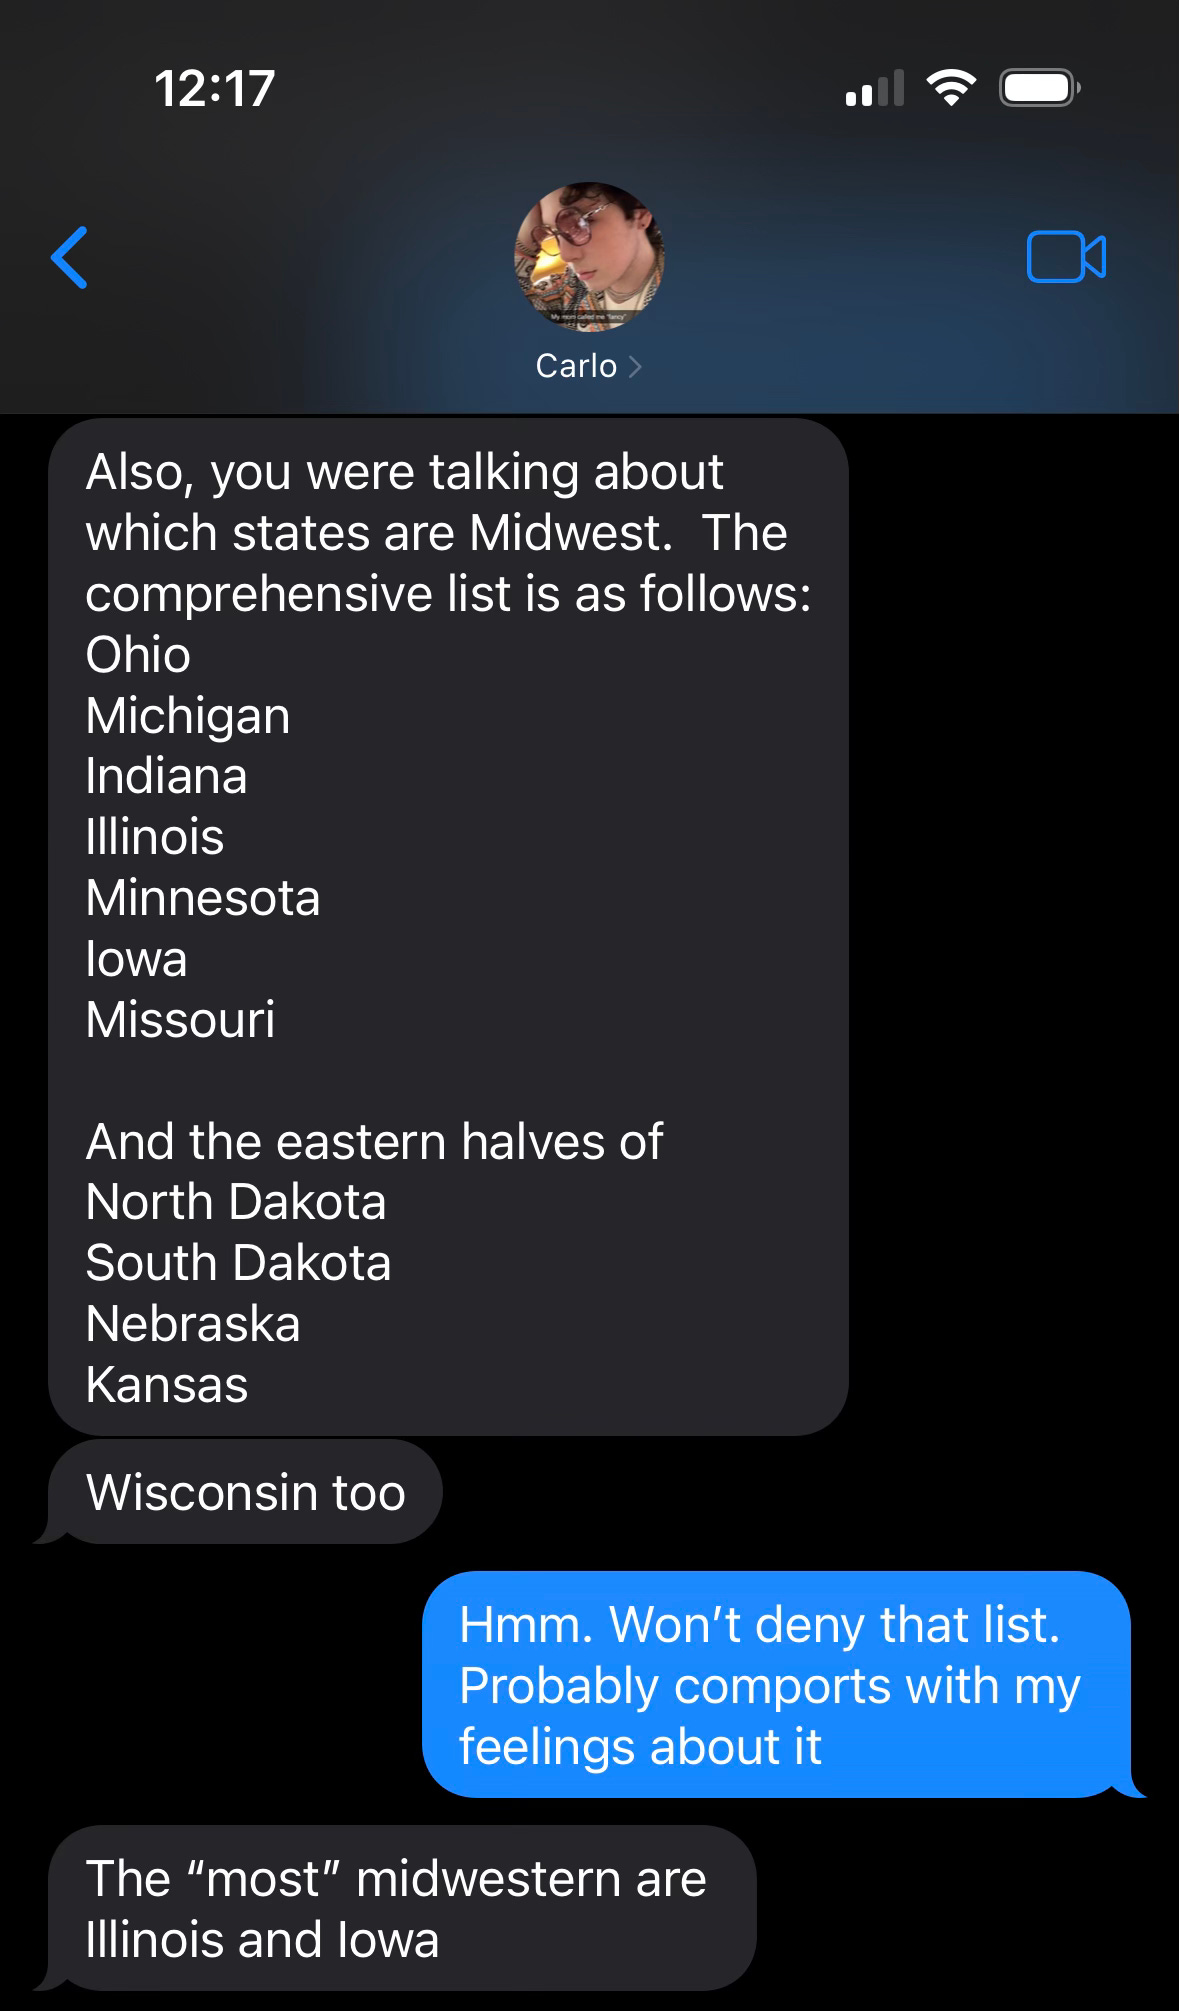 Carlo texting me to tell me that "Also, you were talking about which states are Midwest.  The comprehensive list is as follows: Ohio Michigan Indiana Illinois Minnesota Iowa Missouri  And the eastern halves of North Dakota South Dakota Nebraska Kansas and Wisconsin"